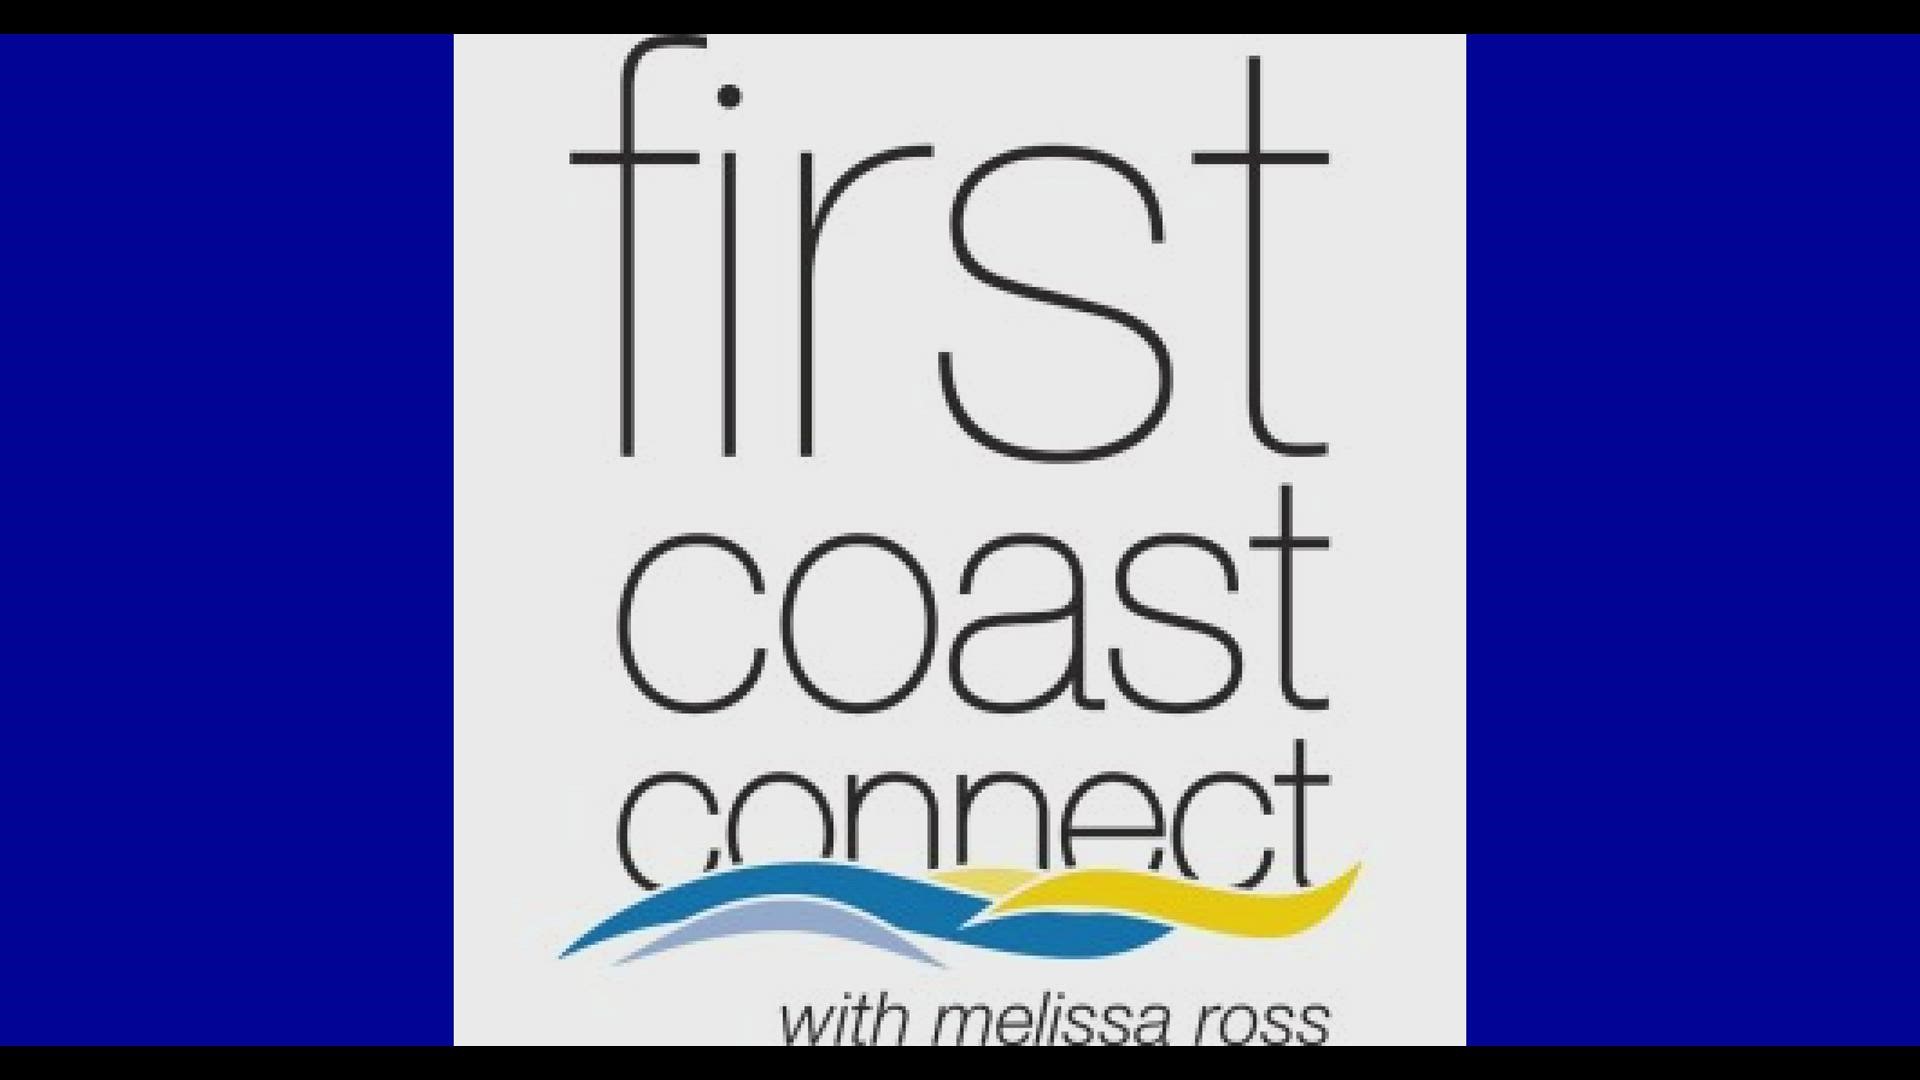 Burton initially made the claim on First Coast Connect with Melissa Ross Friday morning before confirming it again with First Coast News.